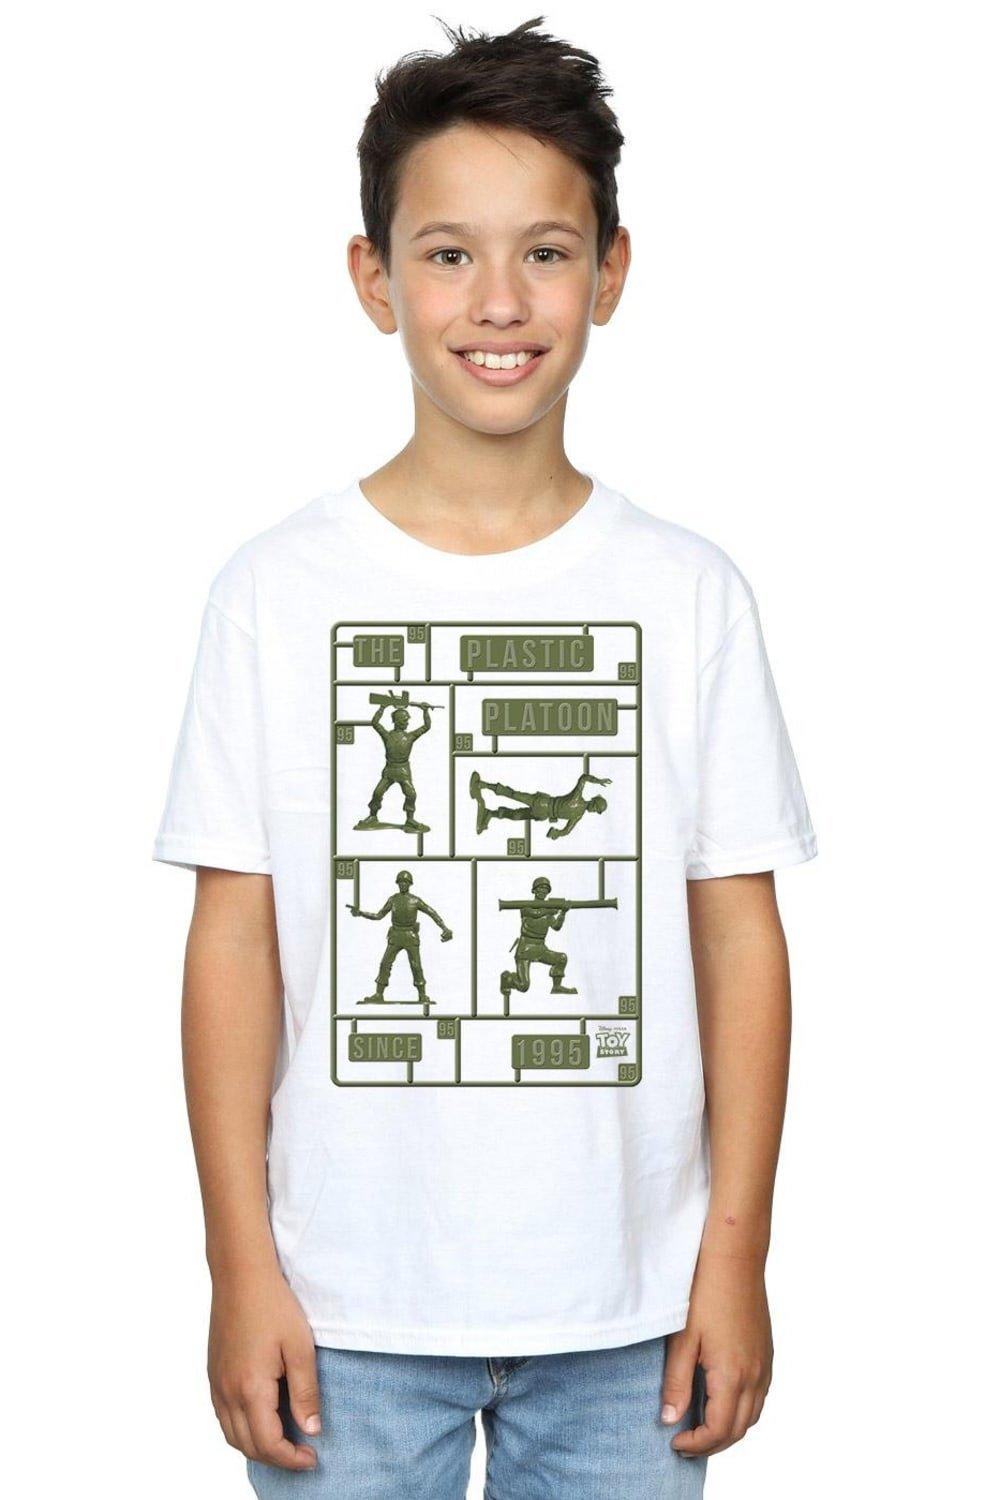 Toy Story The Plastic Platoon T-Shirt